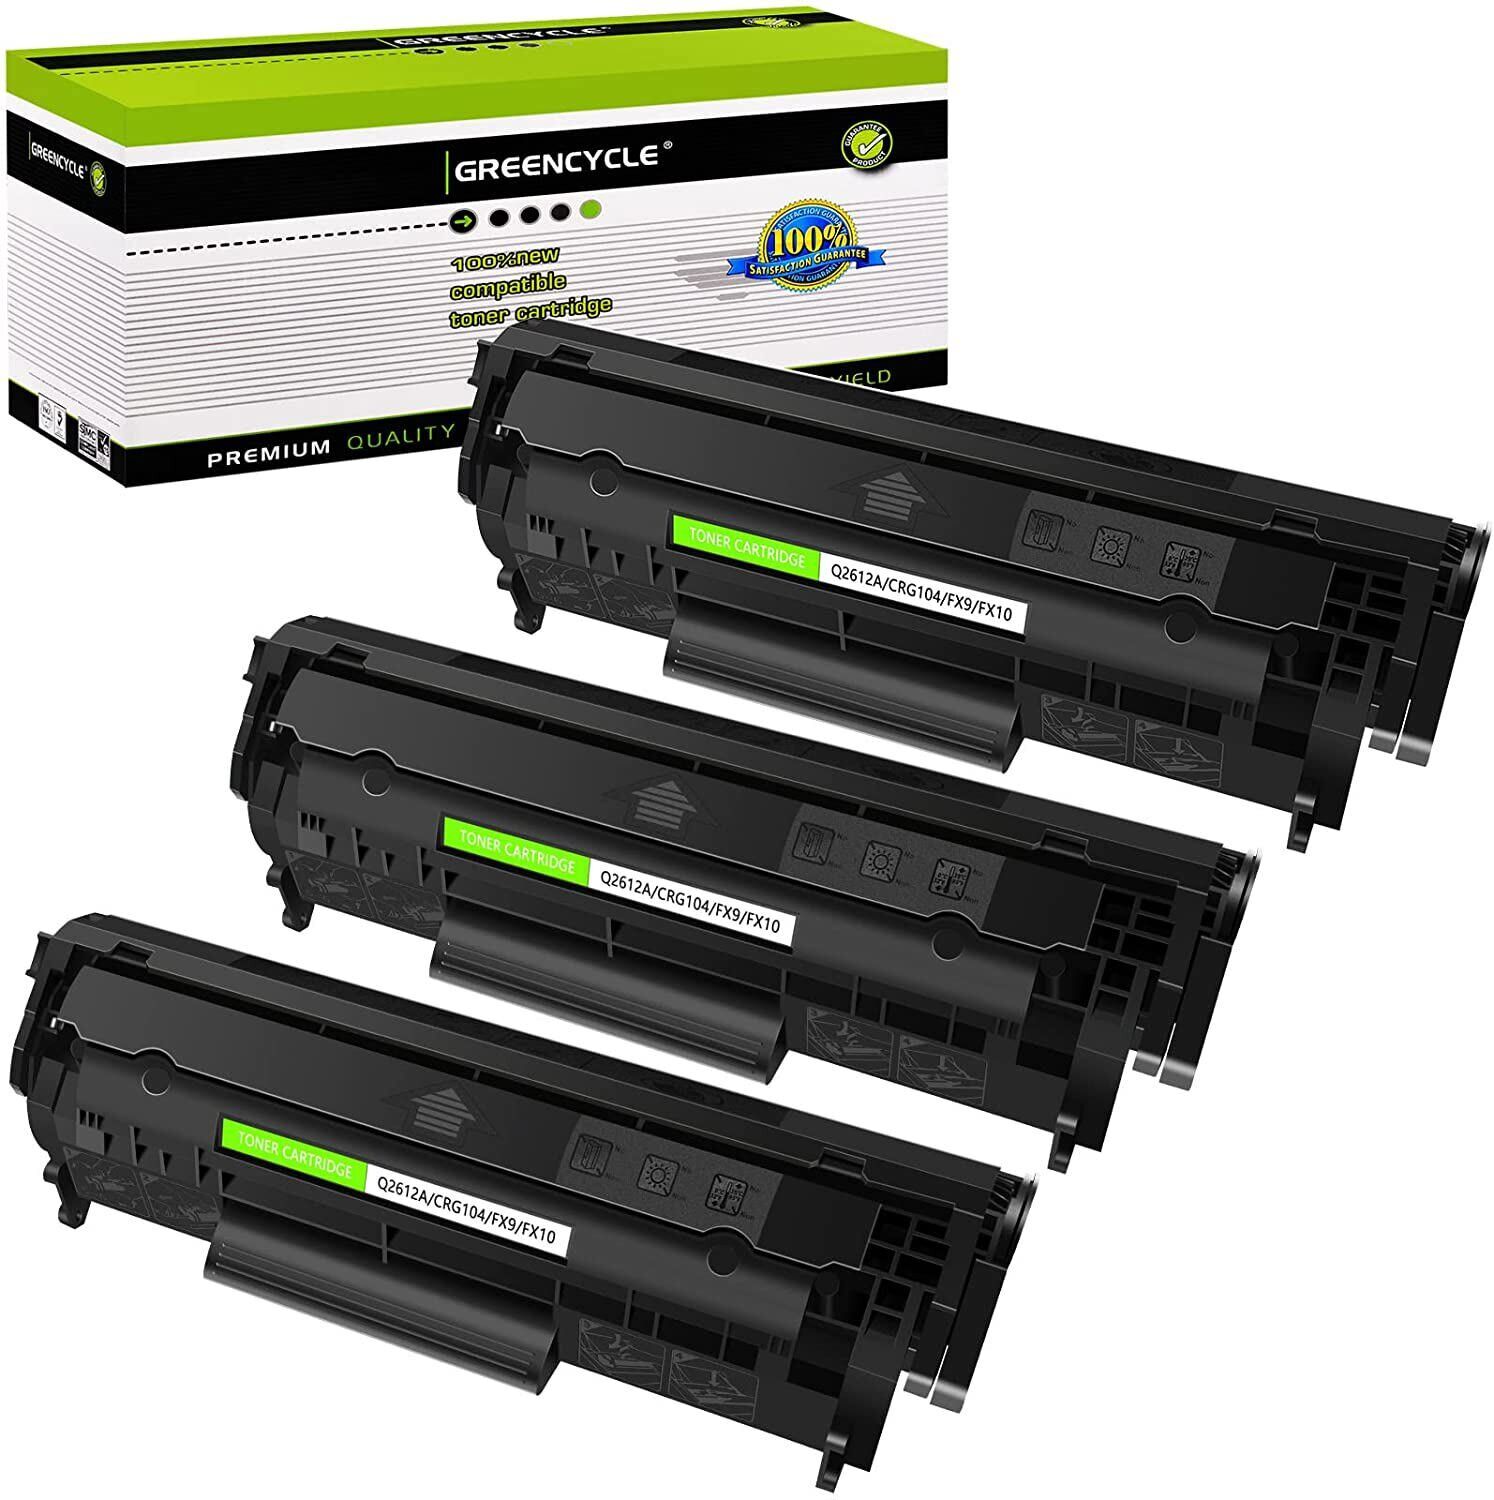 GREENCYCLE 3PK Q2612A Toner Cartridge Compatible with HP LaserJet 1015 1018 3010